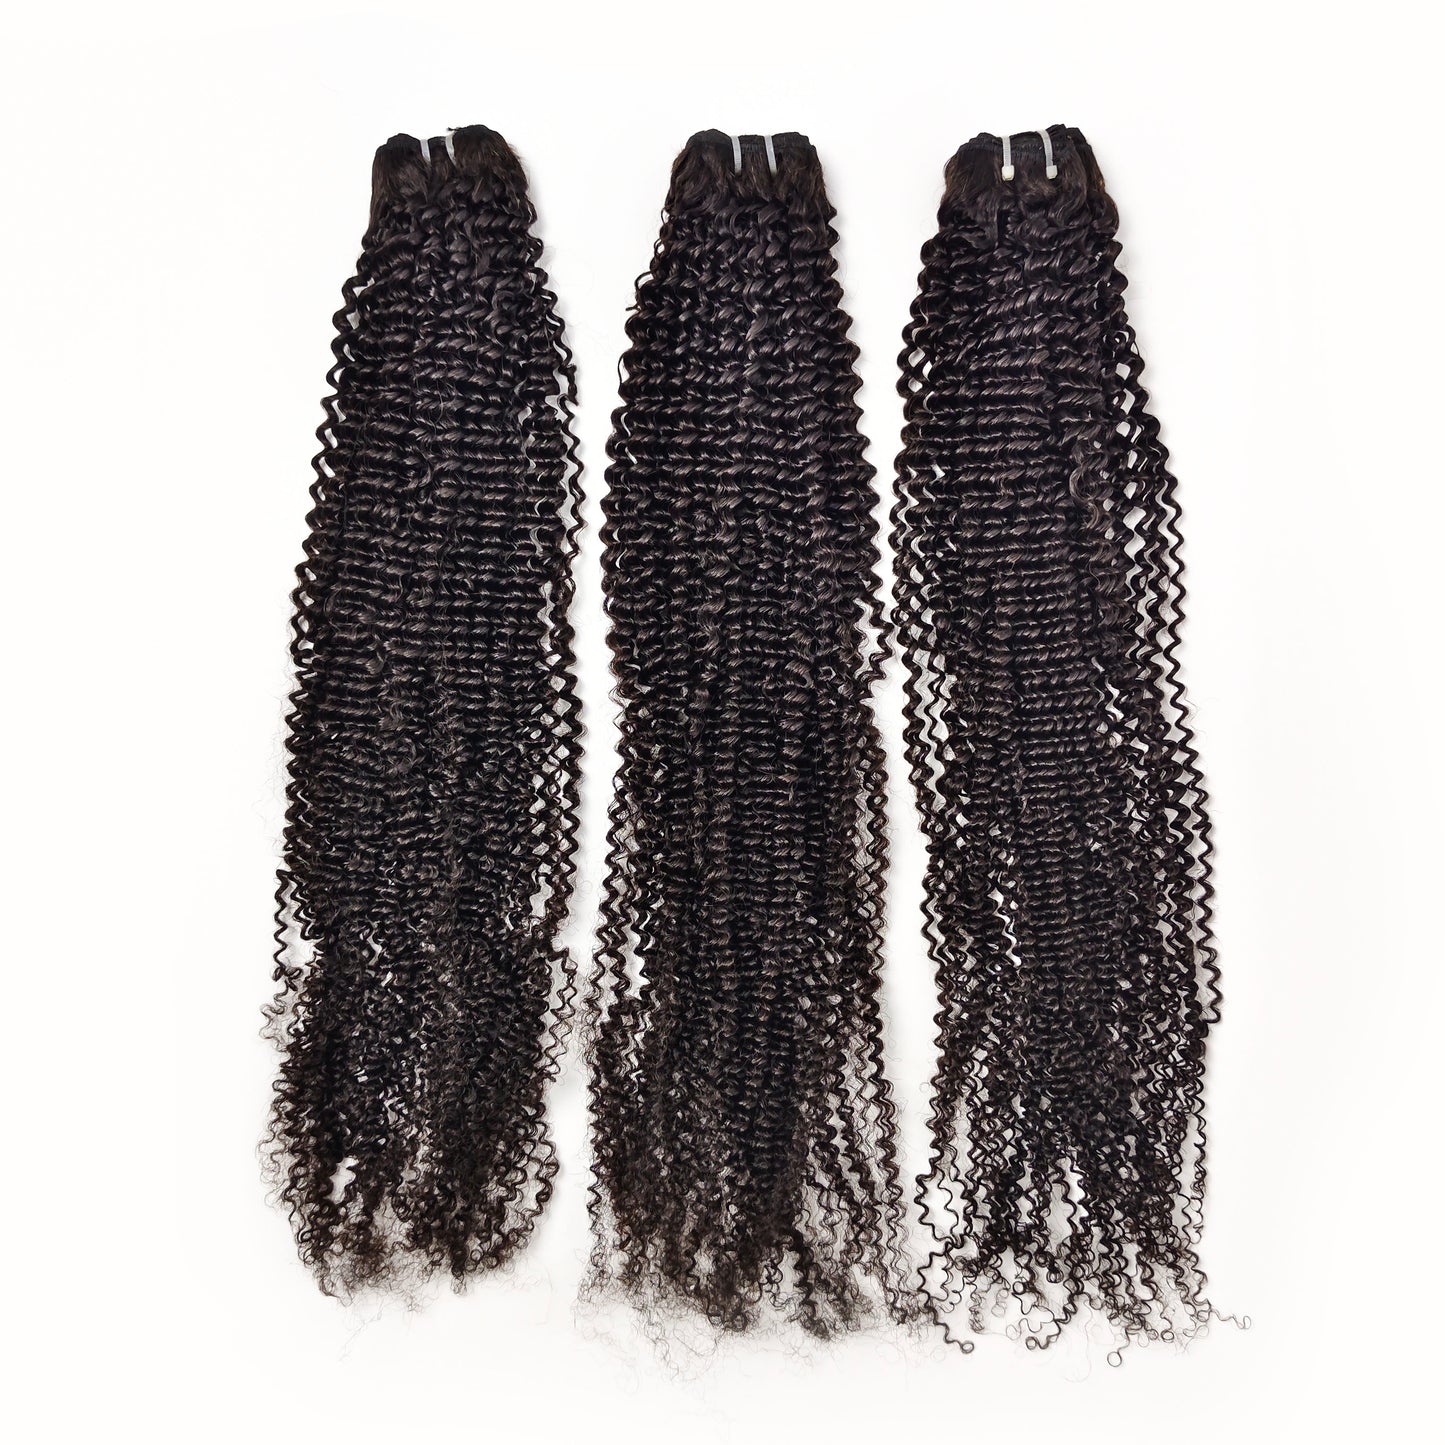 Long Length kinky curl Virgin Human Hair Extensions with 3 Years Life Time